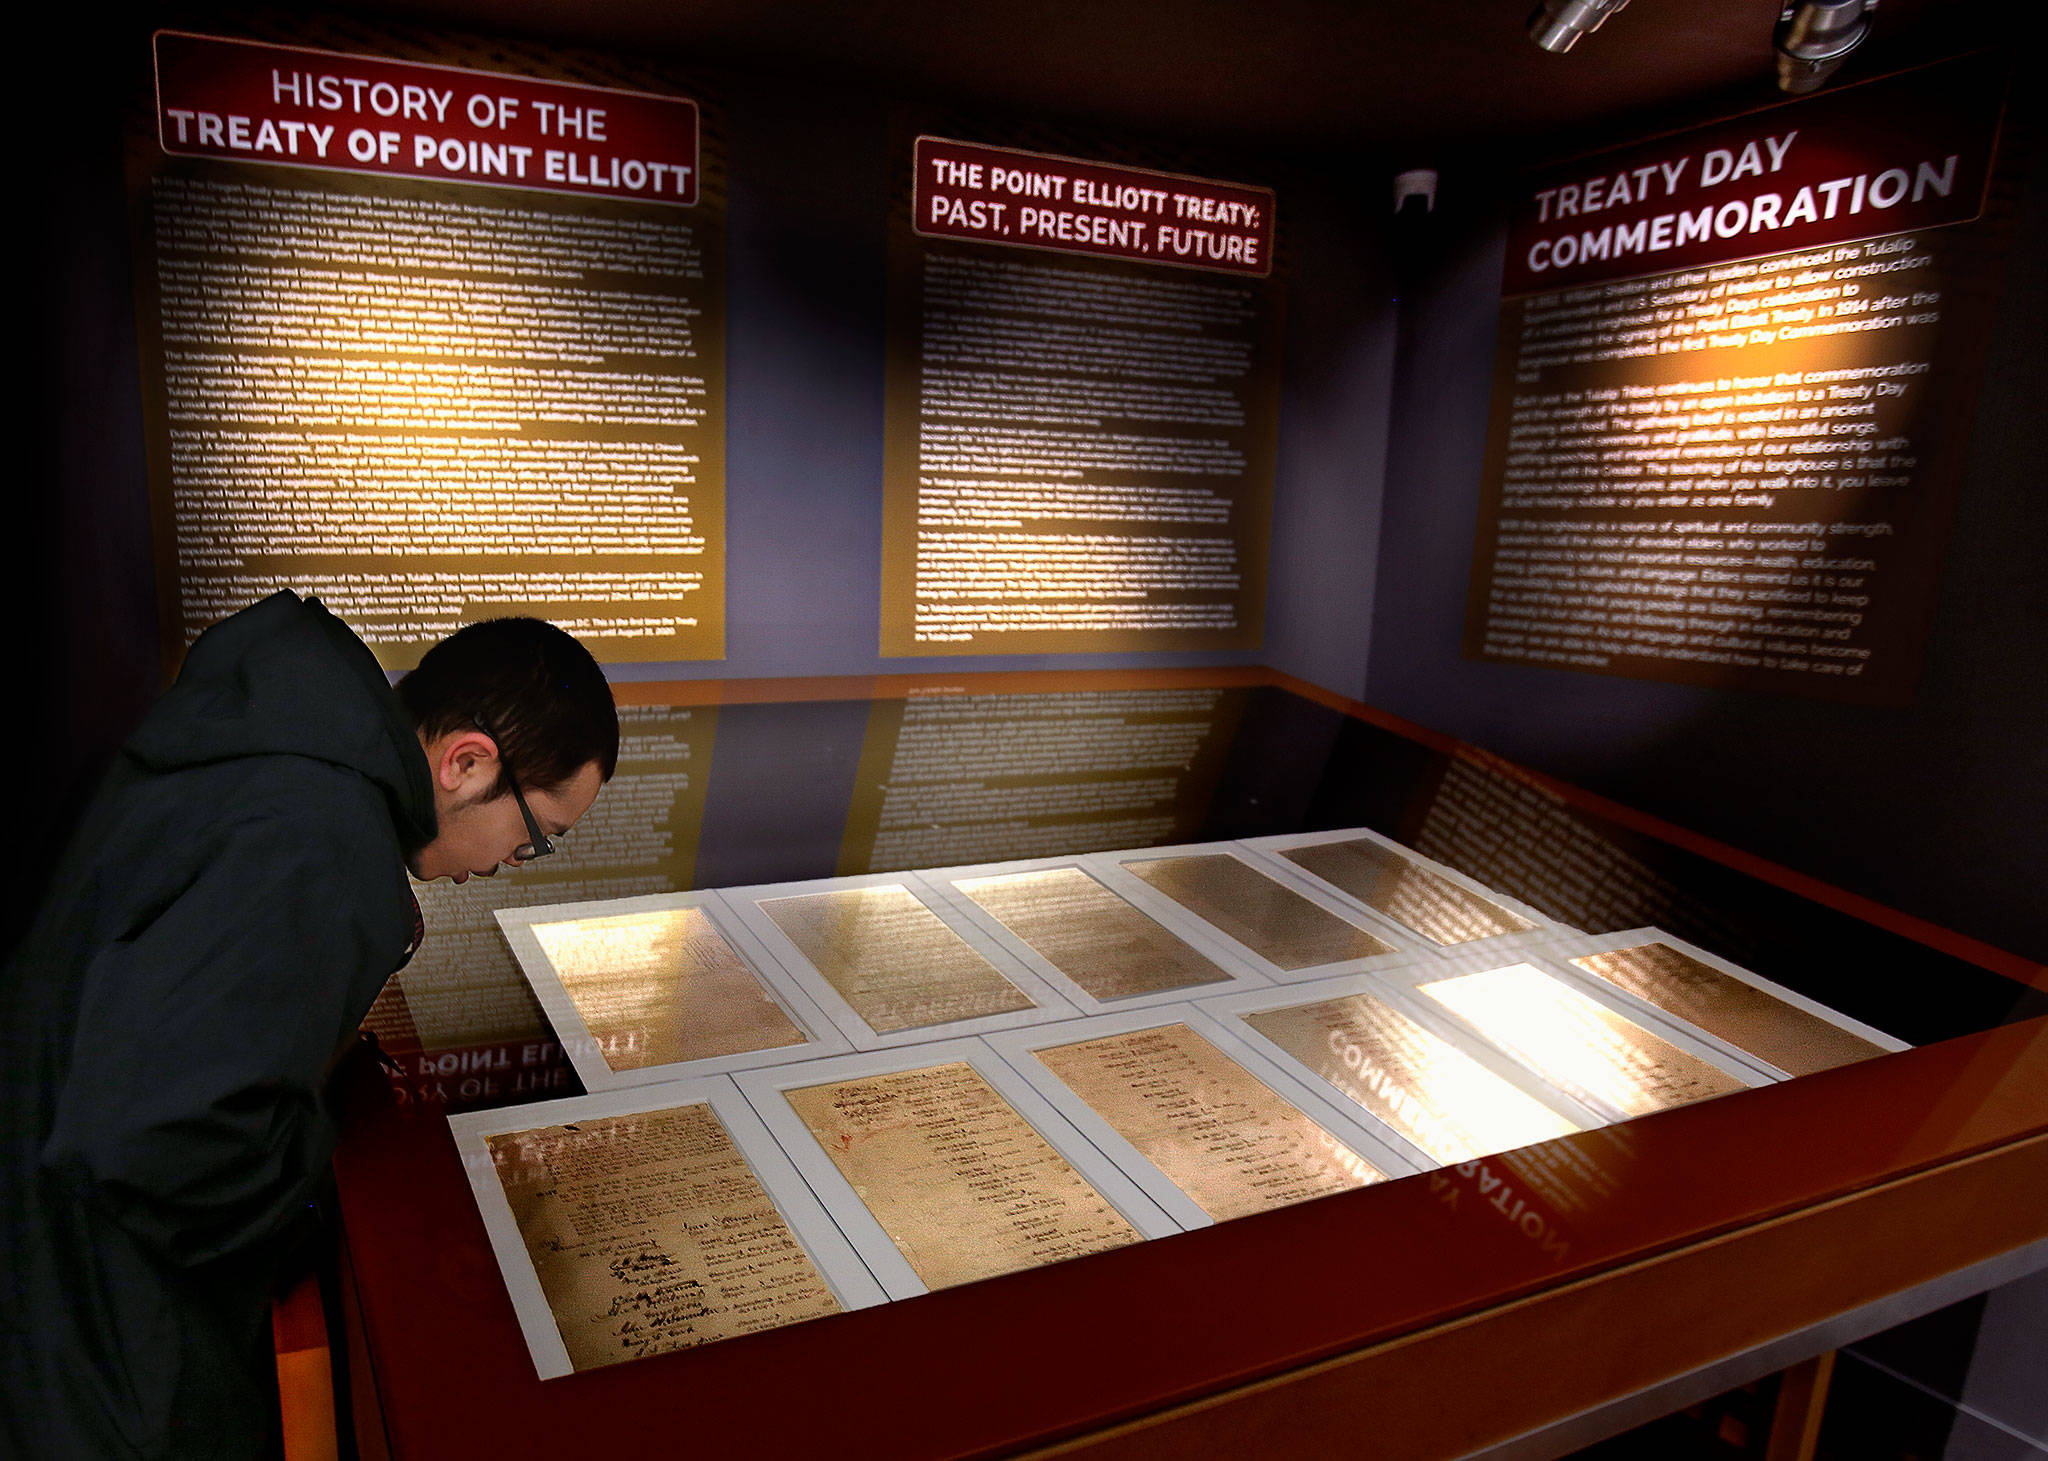 Security guard Jakeb Conway leans forward to read a piece of history on the Treaty of Point Elliott at the Hibulb Cultural Center. The large glass-covered case displays the signed documents for reading. (Dan Bates / The Herald)